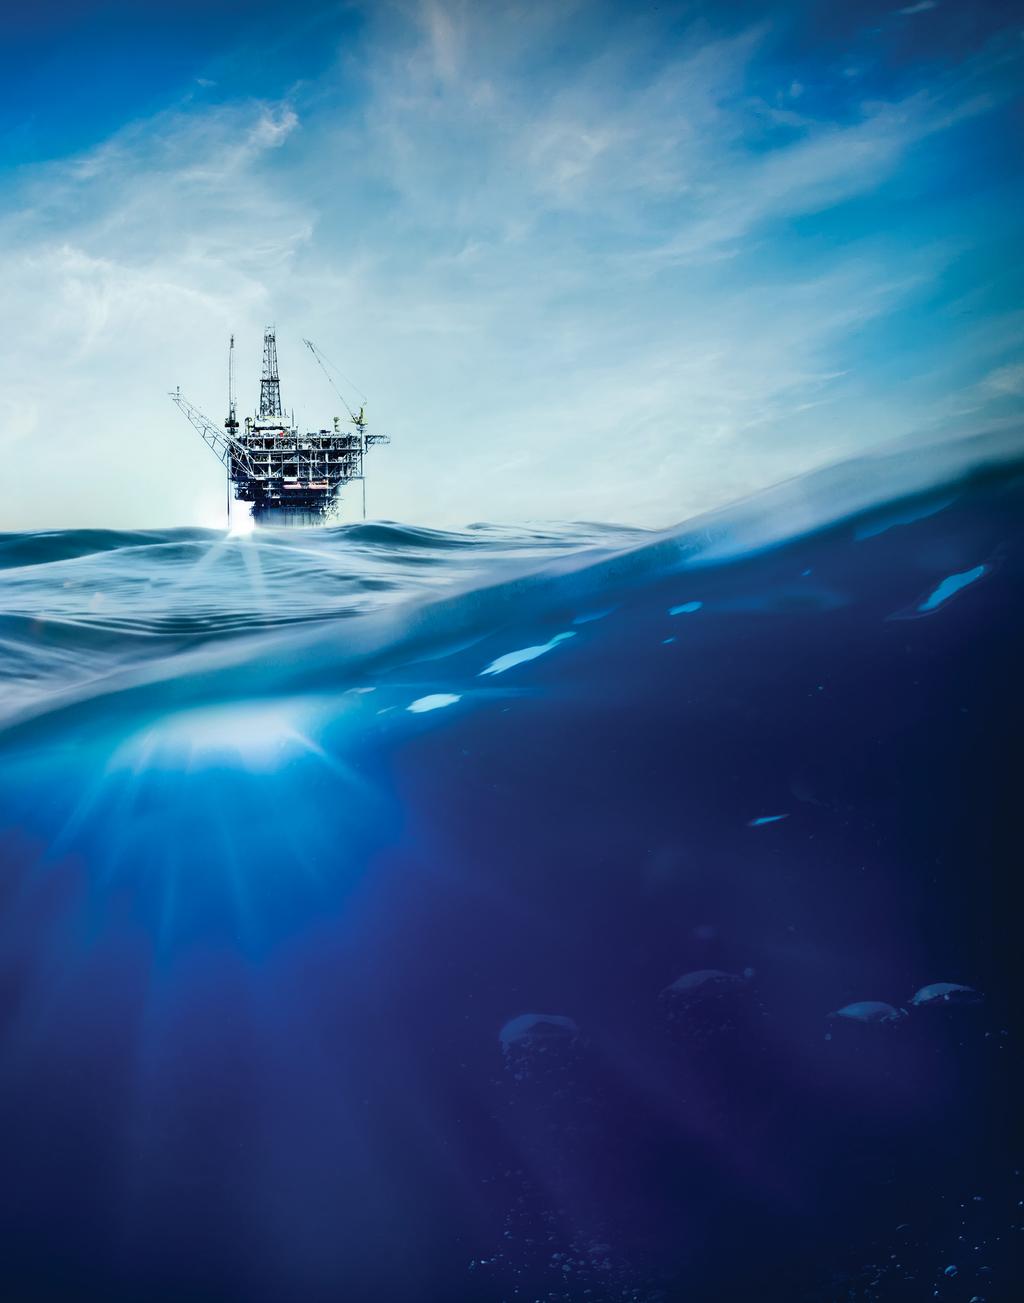 $ 40MILLION INCREASED ANNUAL REVENUE IN ANGOLA CUSTOM LDHI FOR MORE PROFITABLE PRODUCTION Subsea Tieback Gulf of Mexico SITUATION: To prevent shutting in production, an oil producer sought a smarter